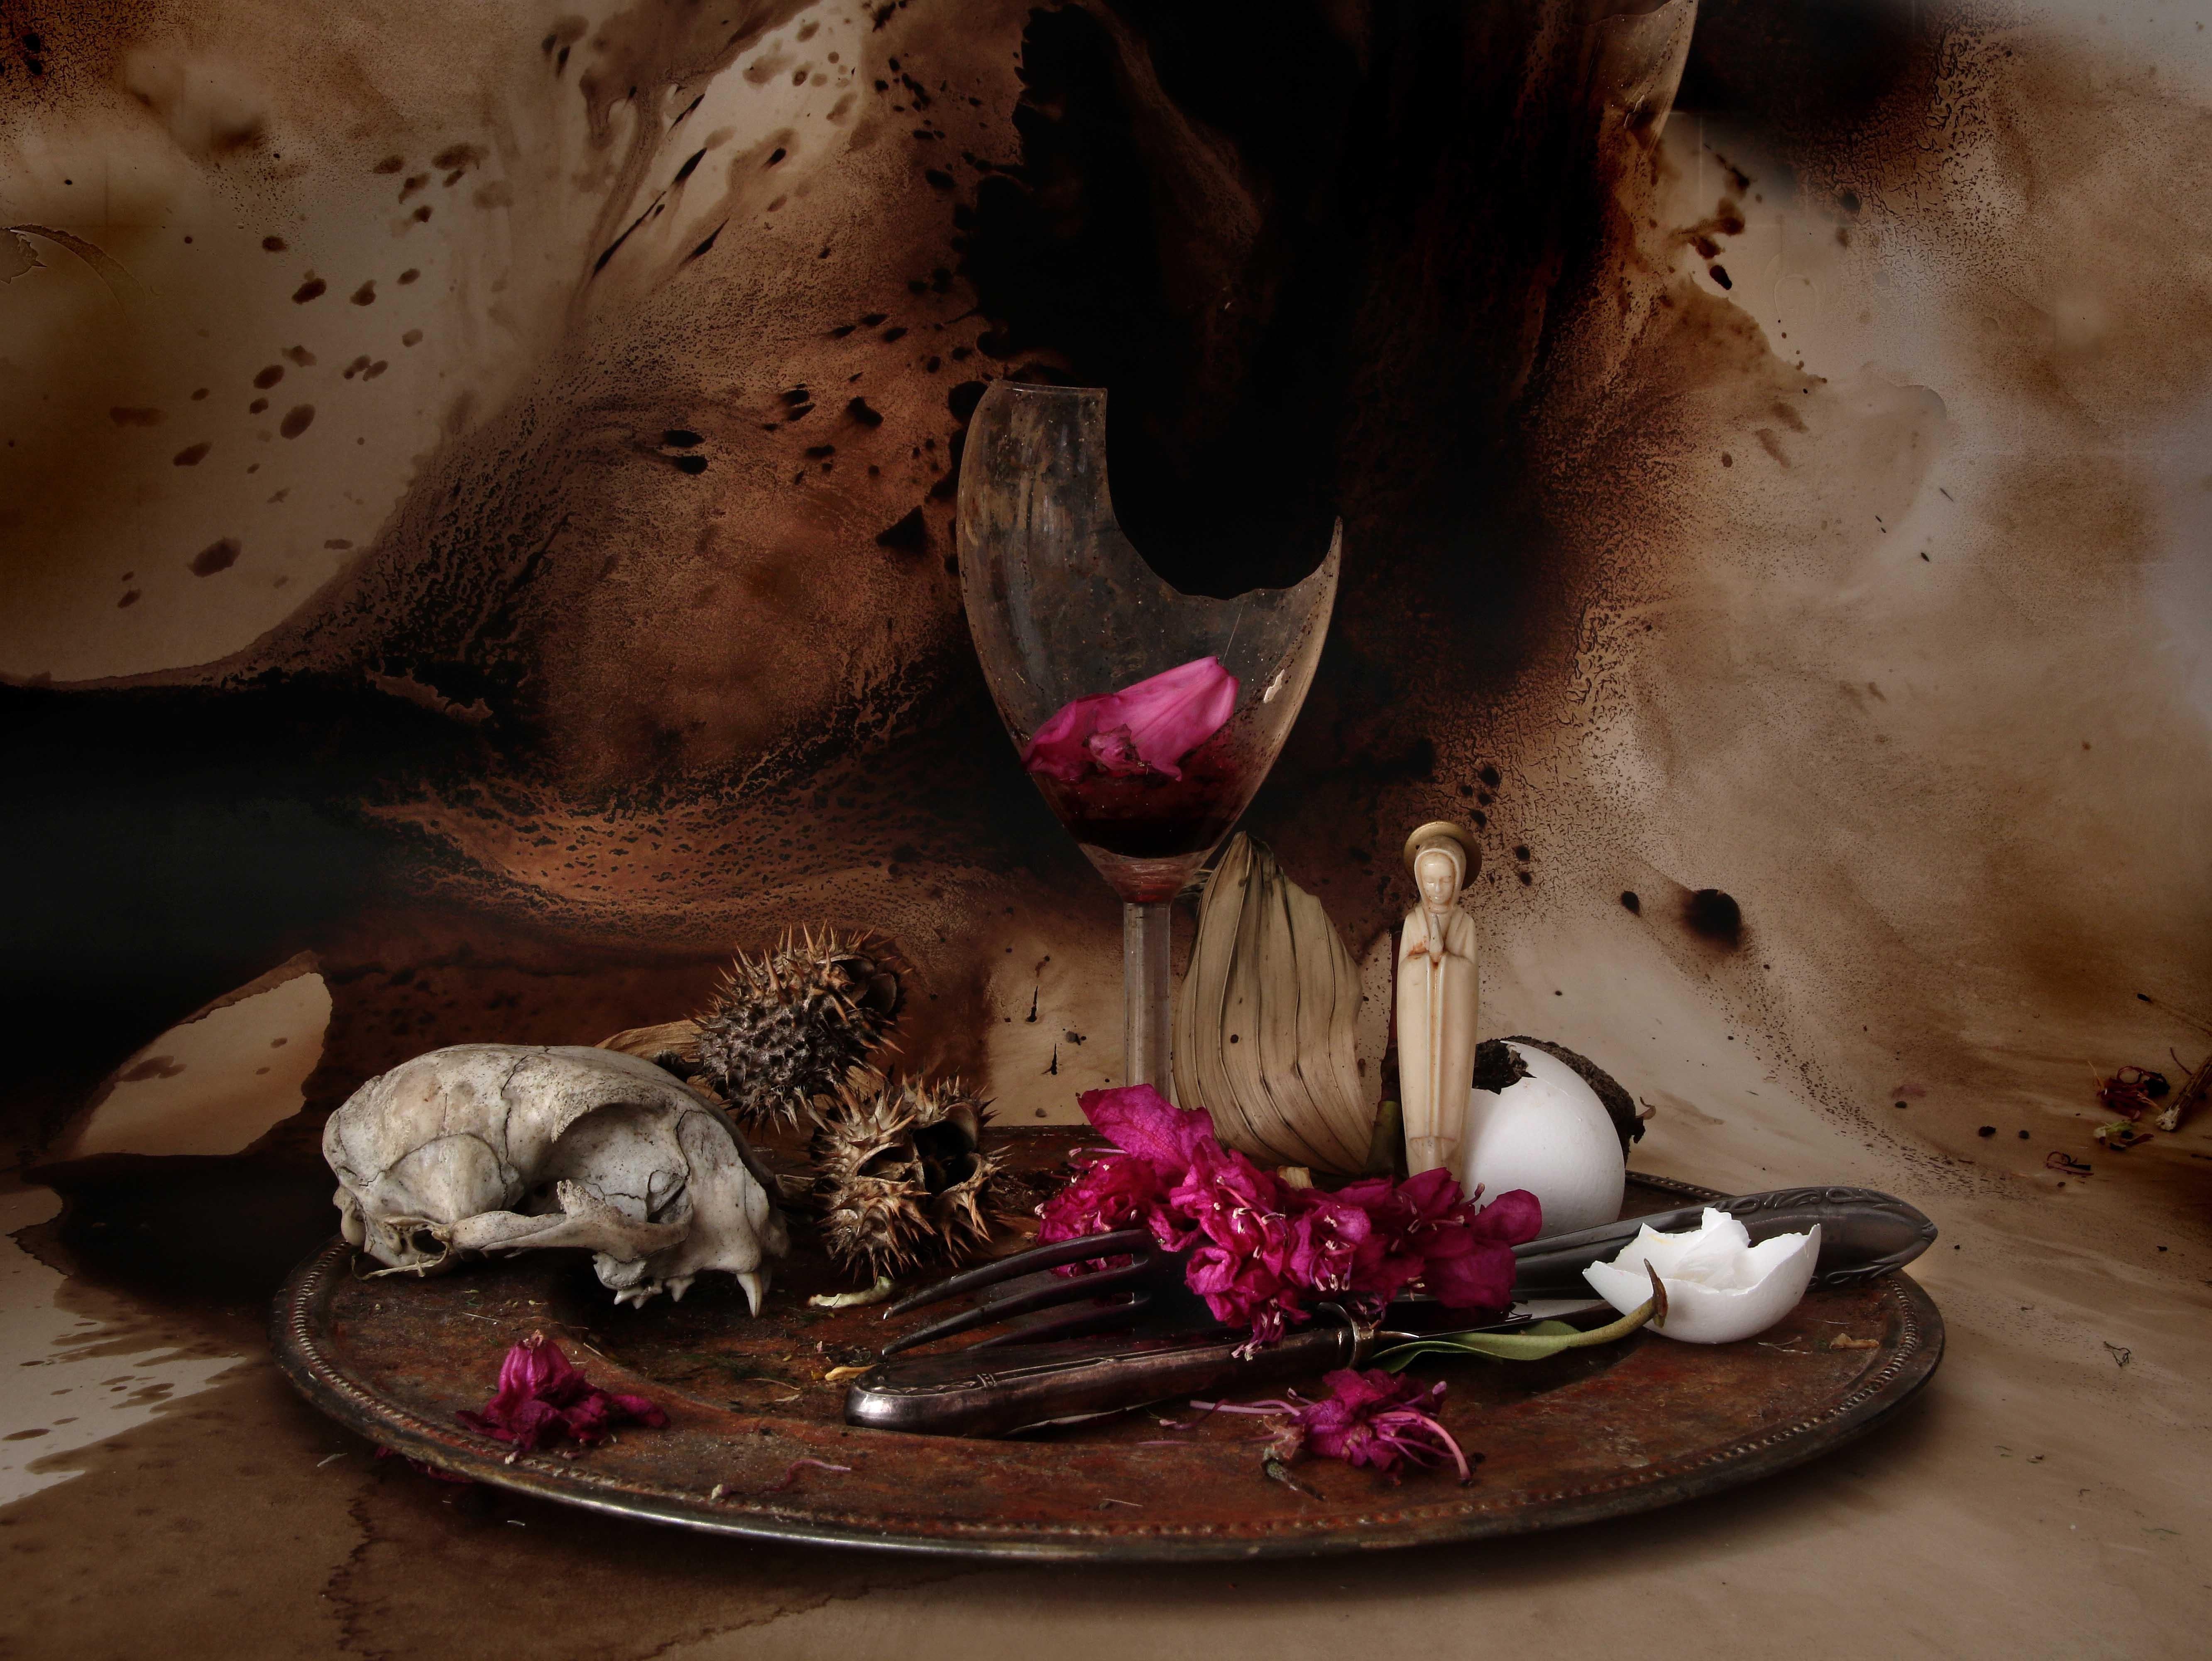 From the series "Natura Morte" still life
The photographic image of the withered flowers, rotten fruit, animal bones and broken glasses seems to preserve the objects, keep them alive and thus point them beyond death.

signed